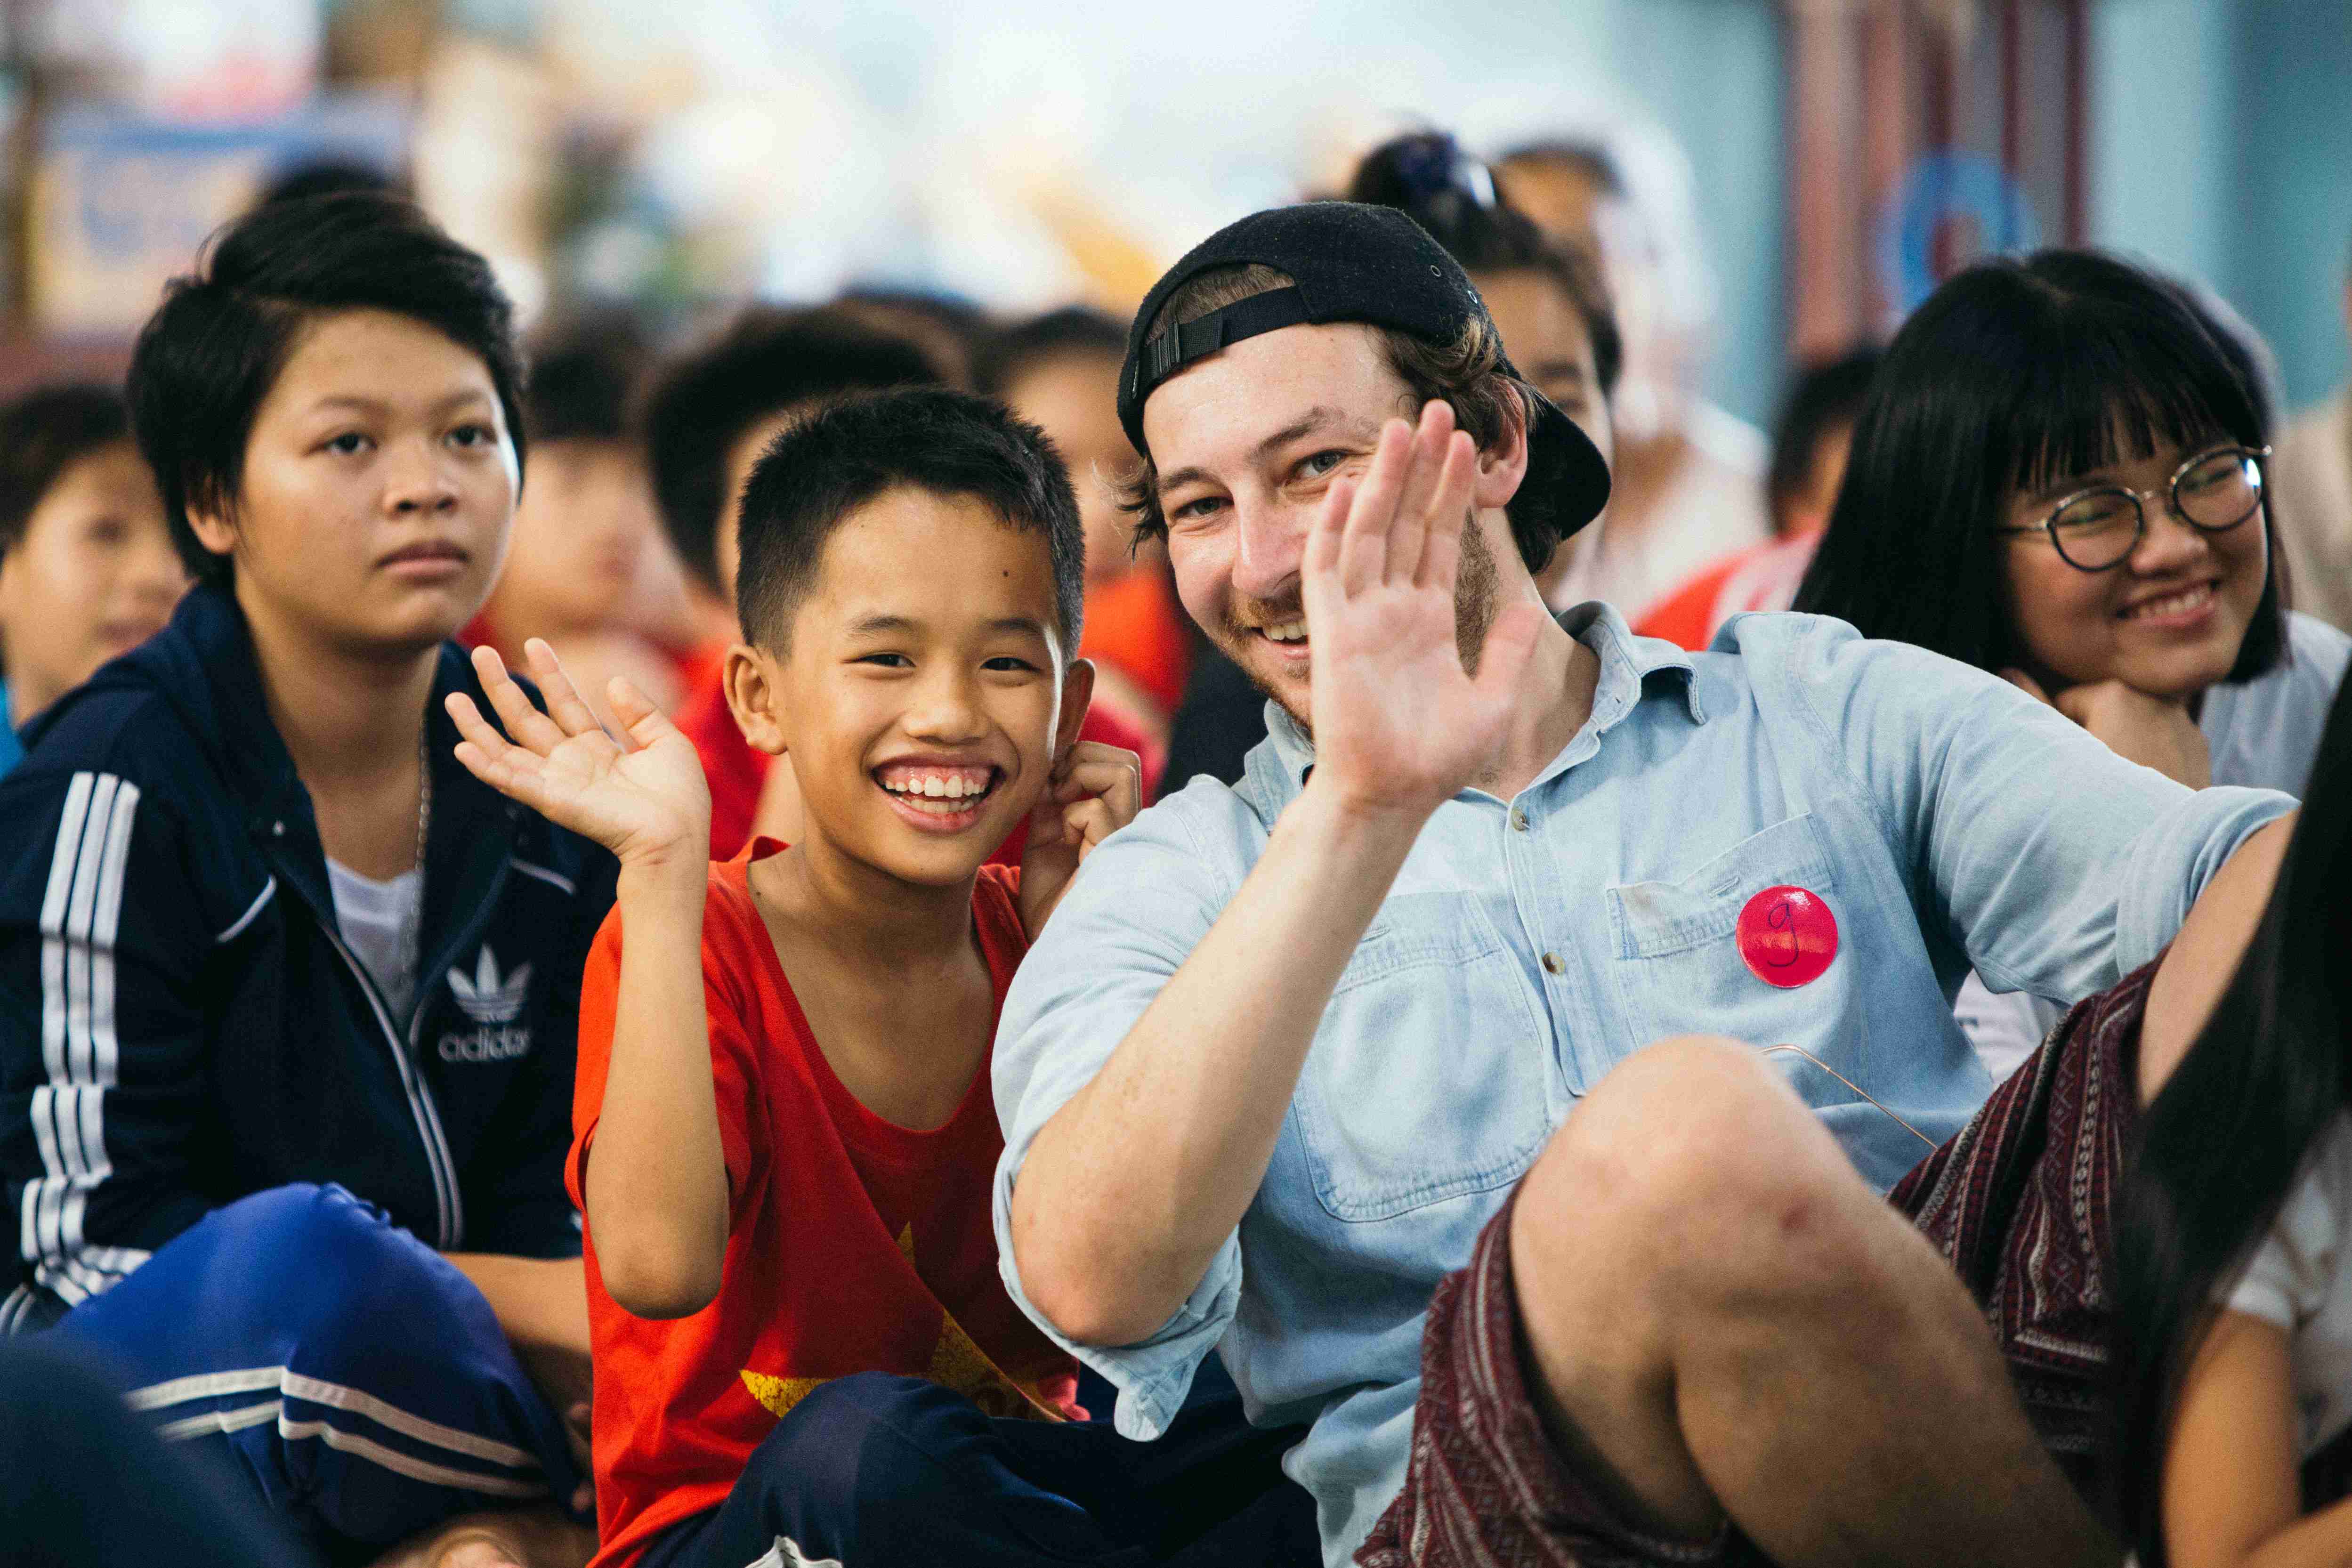 Over the two weeks leading to Christmas, RMIT Vietnam students at Saigon South campus sold colourful handmade gifts and cards to raise money for children at SOS Village Ben Tre. The students then visited the SOS Village, organising fun games and offering gifts to raise the spirits of the children.